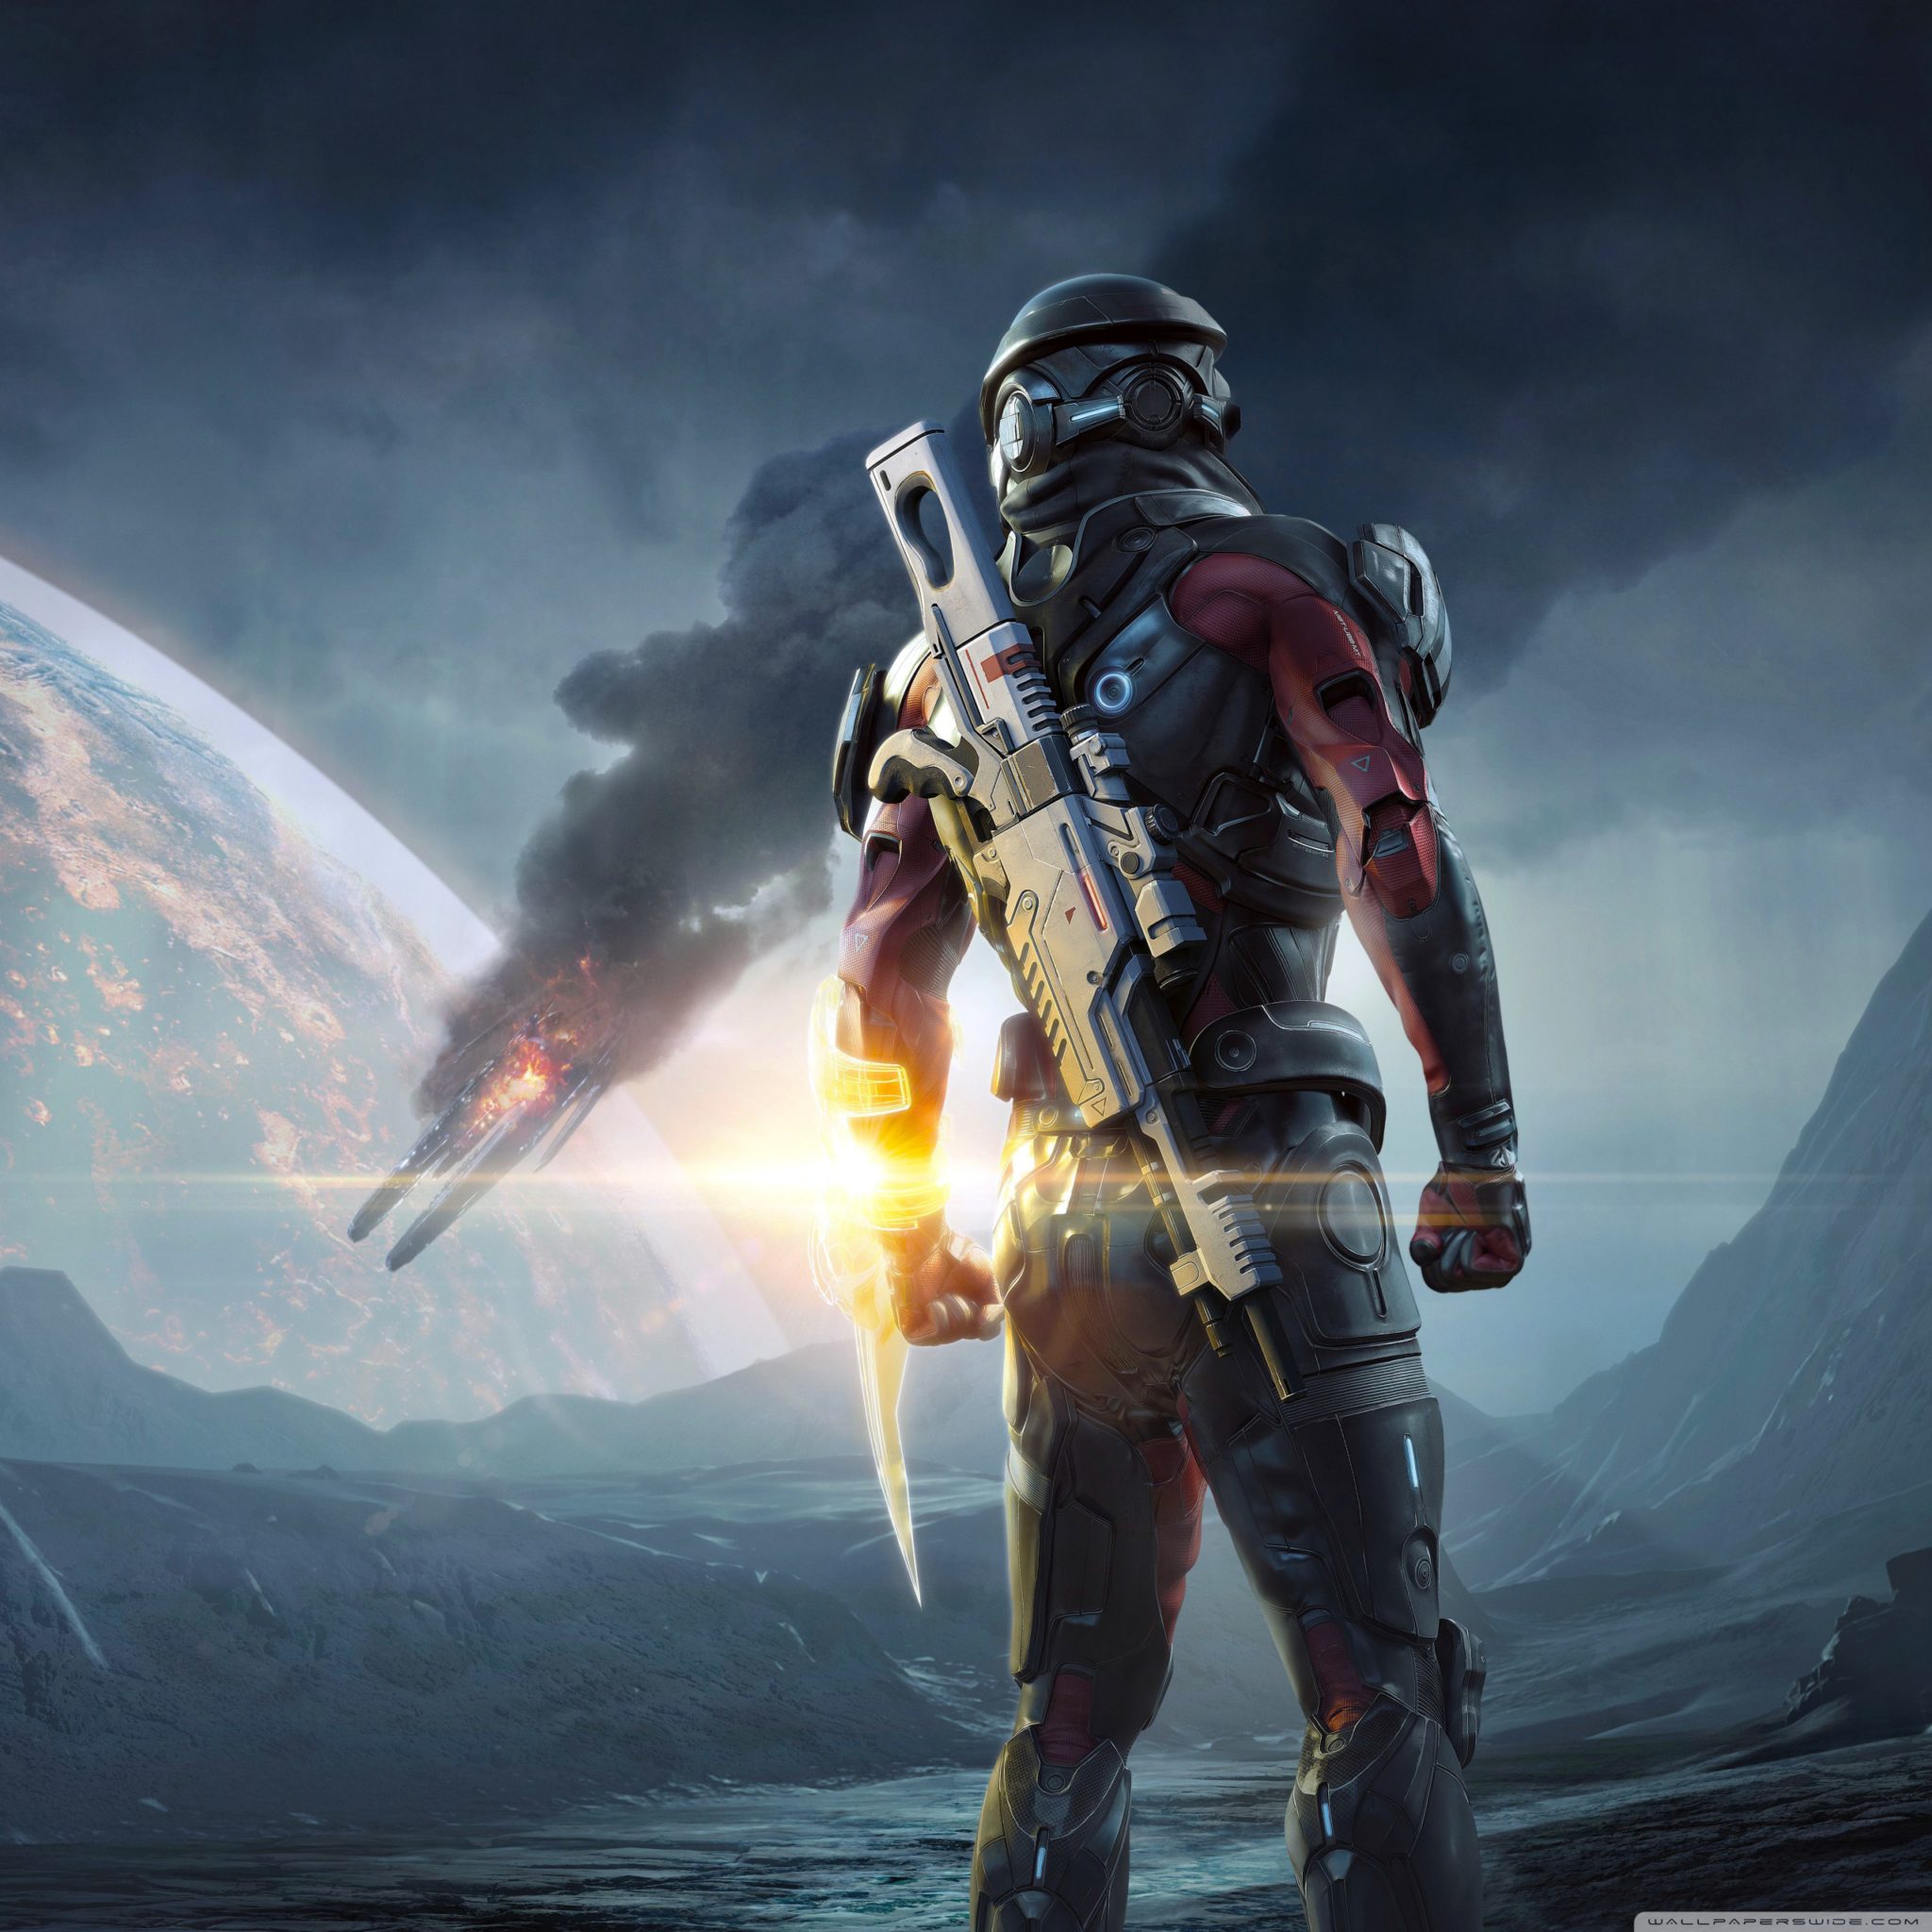 Mass Effect Andromeda 2017 Video Game 3d Hd Wallpapers Free Download – HD Wallpapers Backgrounds Desktop, iphone & Android Free Download